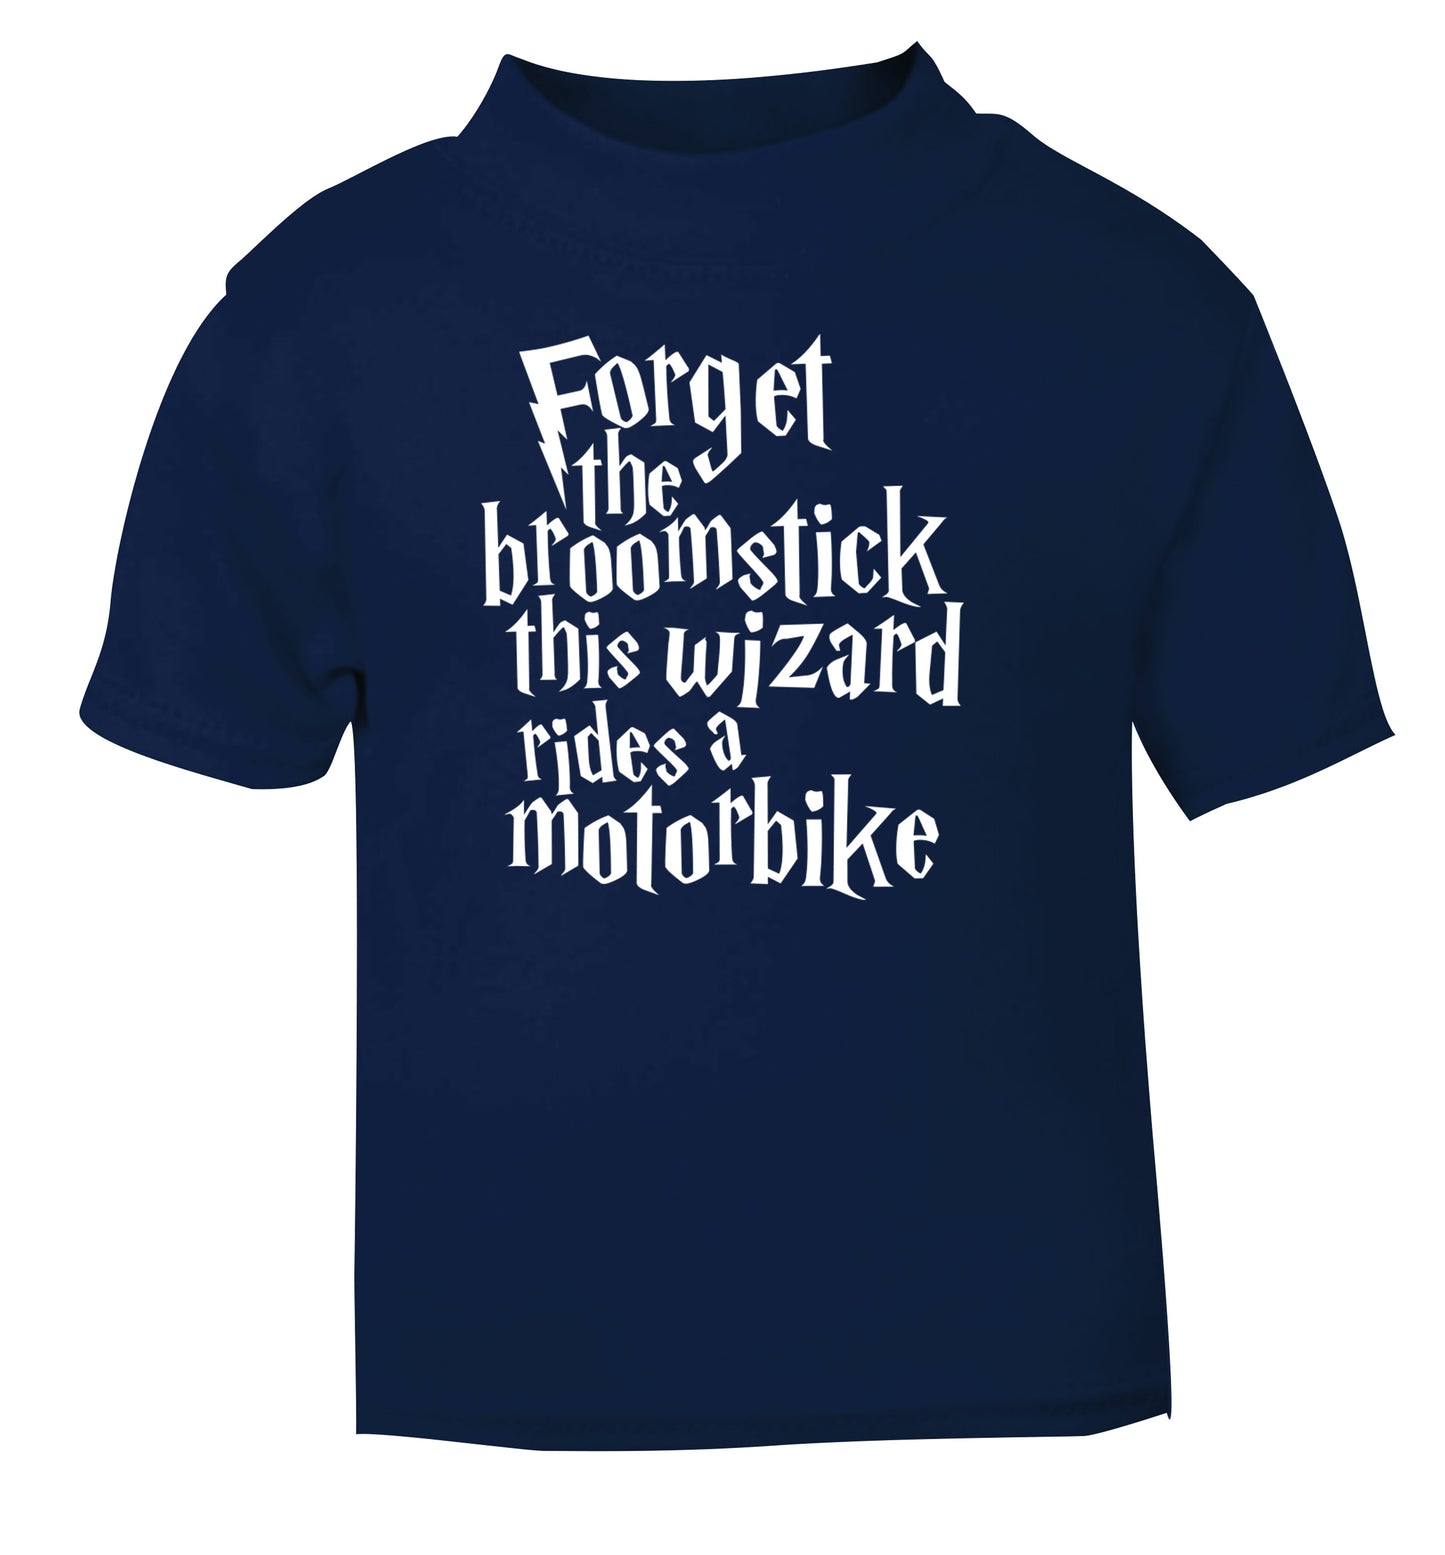 Forget the broomstick this wizard rides a motorbike navy Baby Toddler Tshirt 2 Years